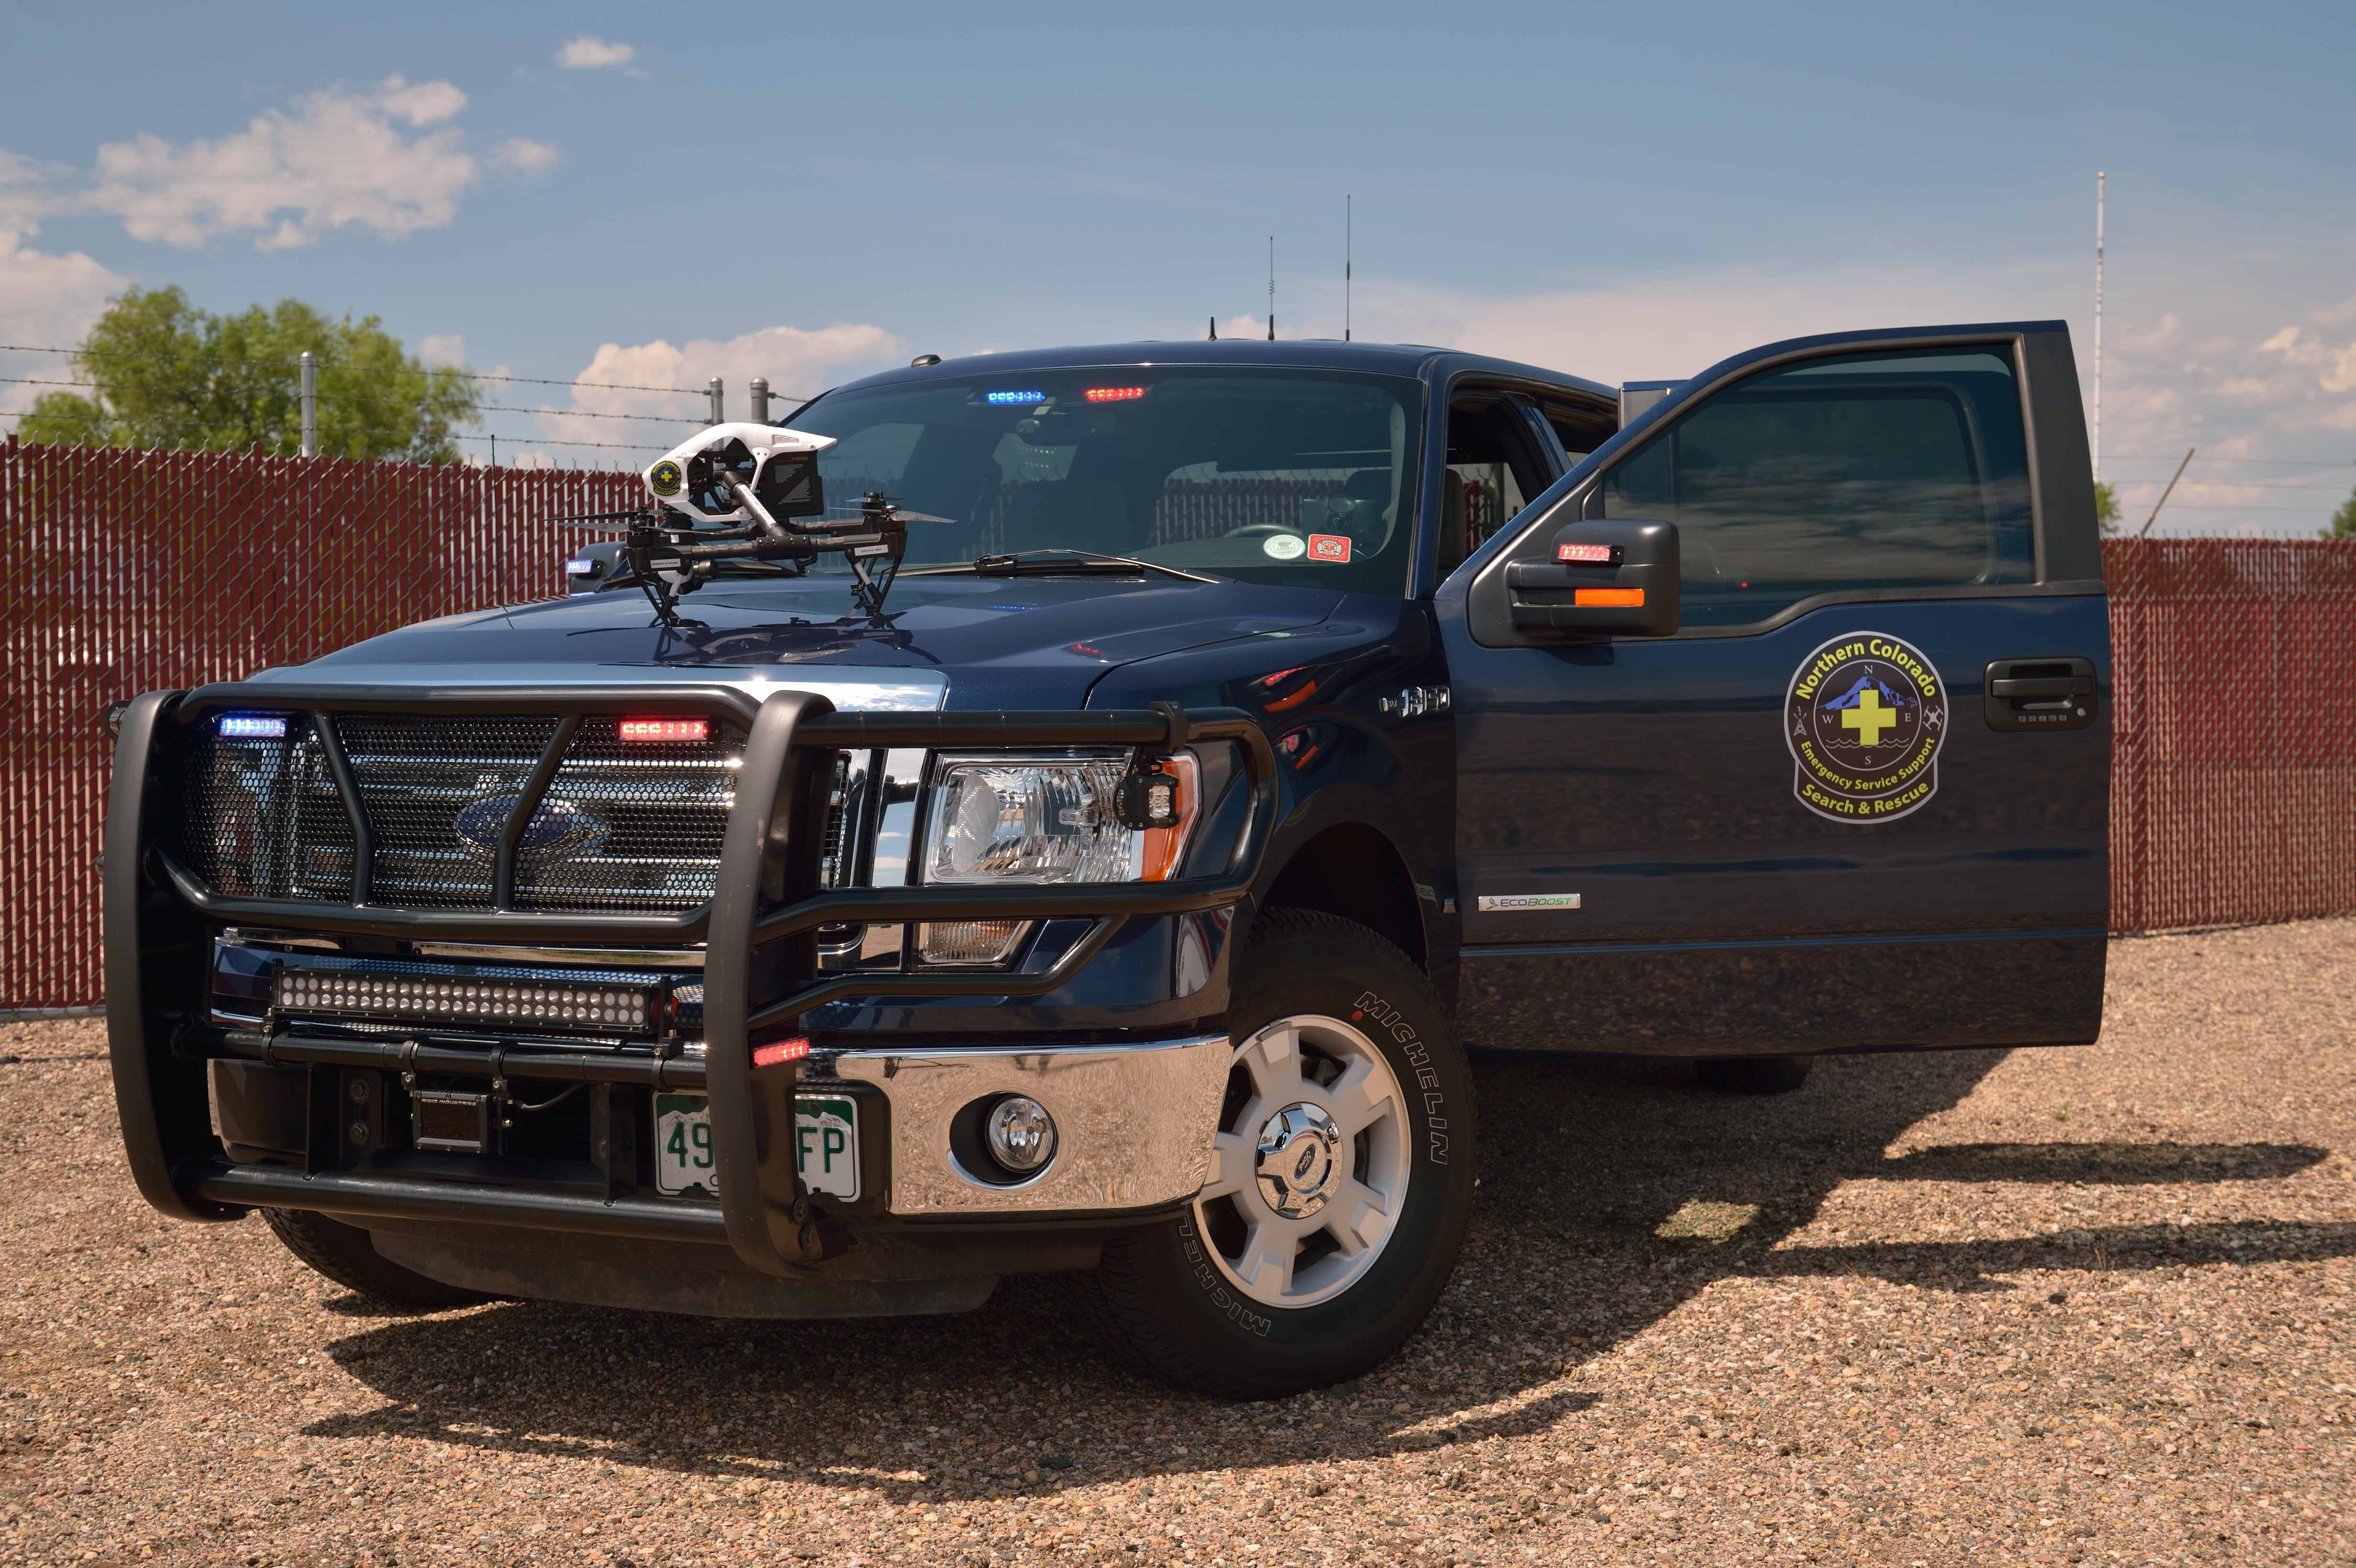 NOCO SAR's rescue vehicles benefit from materials like Seaboard to reduce wear and tear.